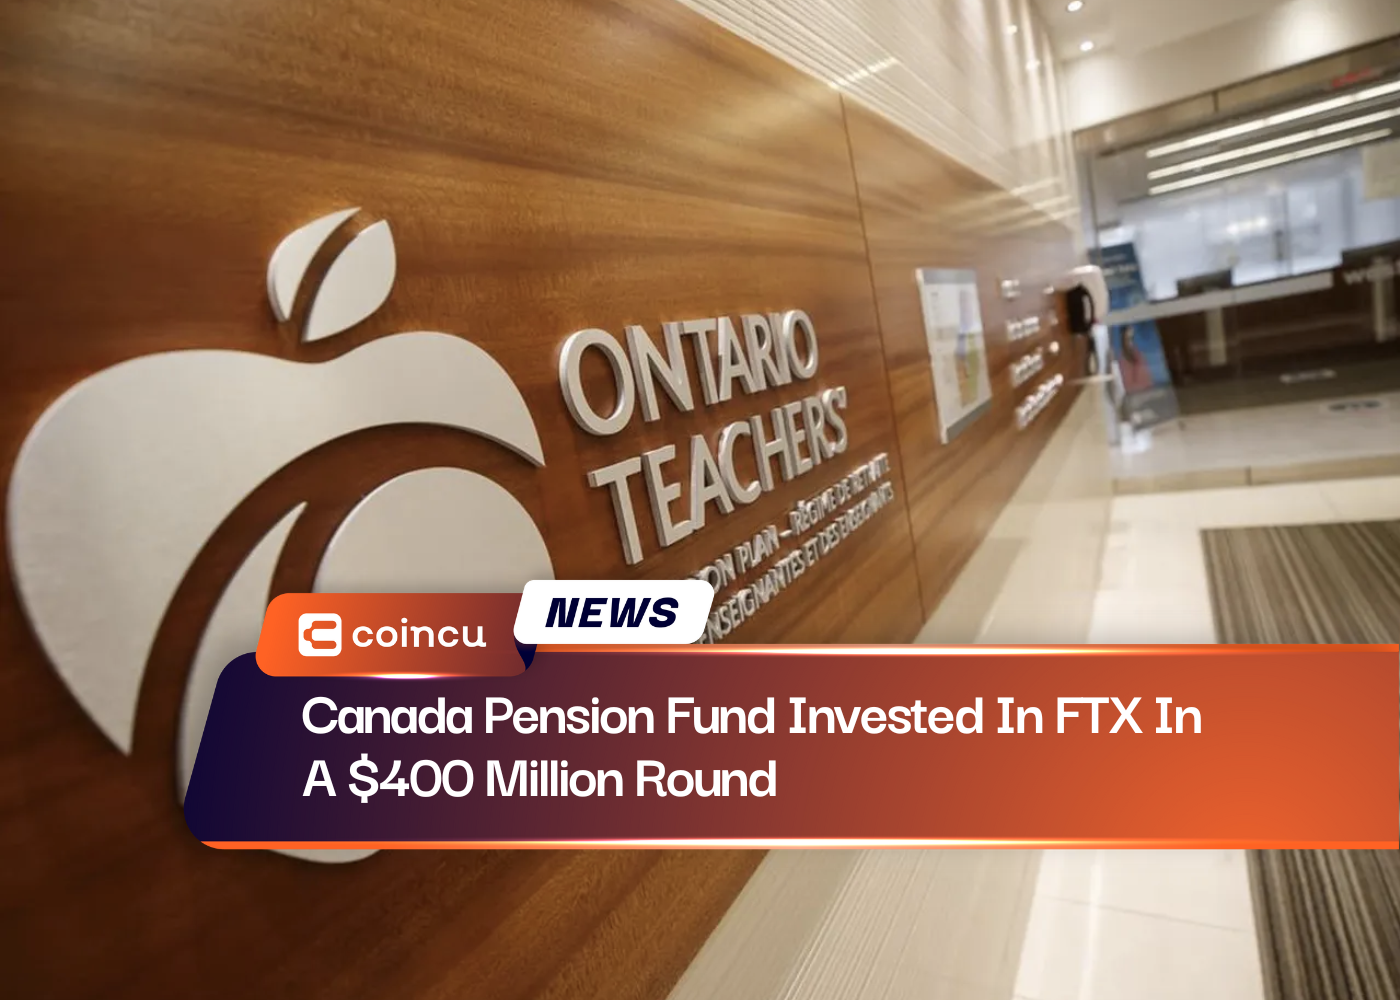 Canada Pension Fund Invested In FTX In A $400 Million Round